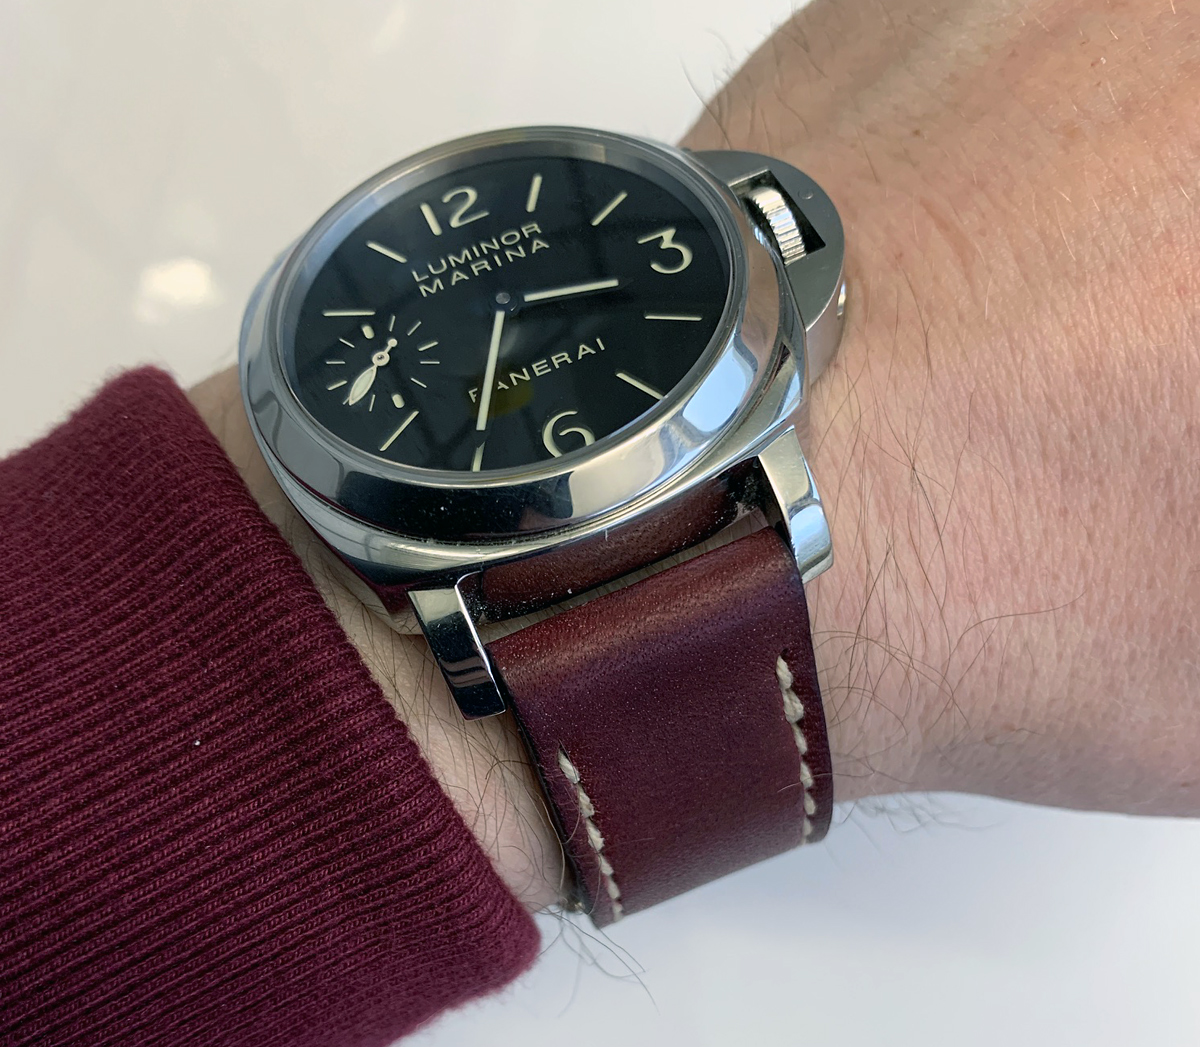 Panerai 111 on Tempest leather with natural stitching. © Steen Kenneth Jensen